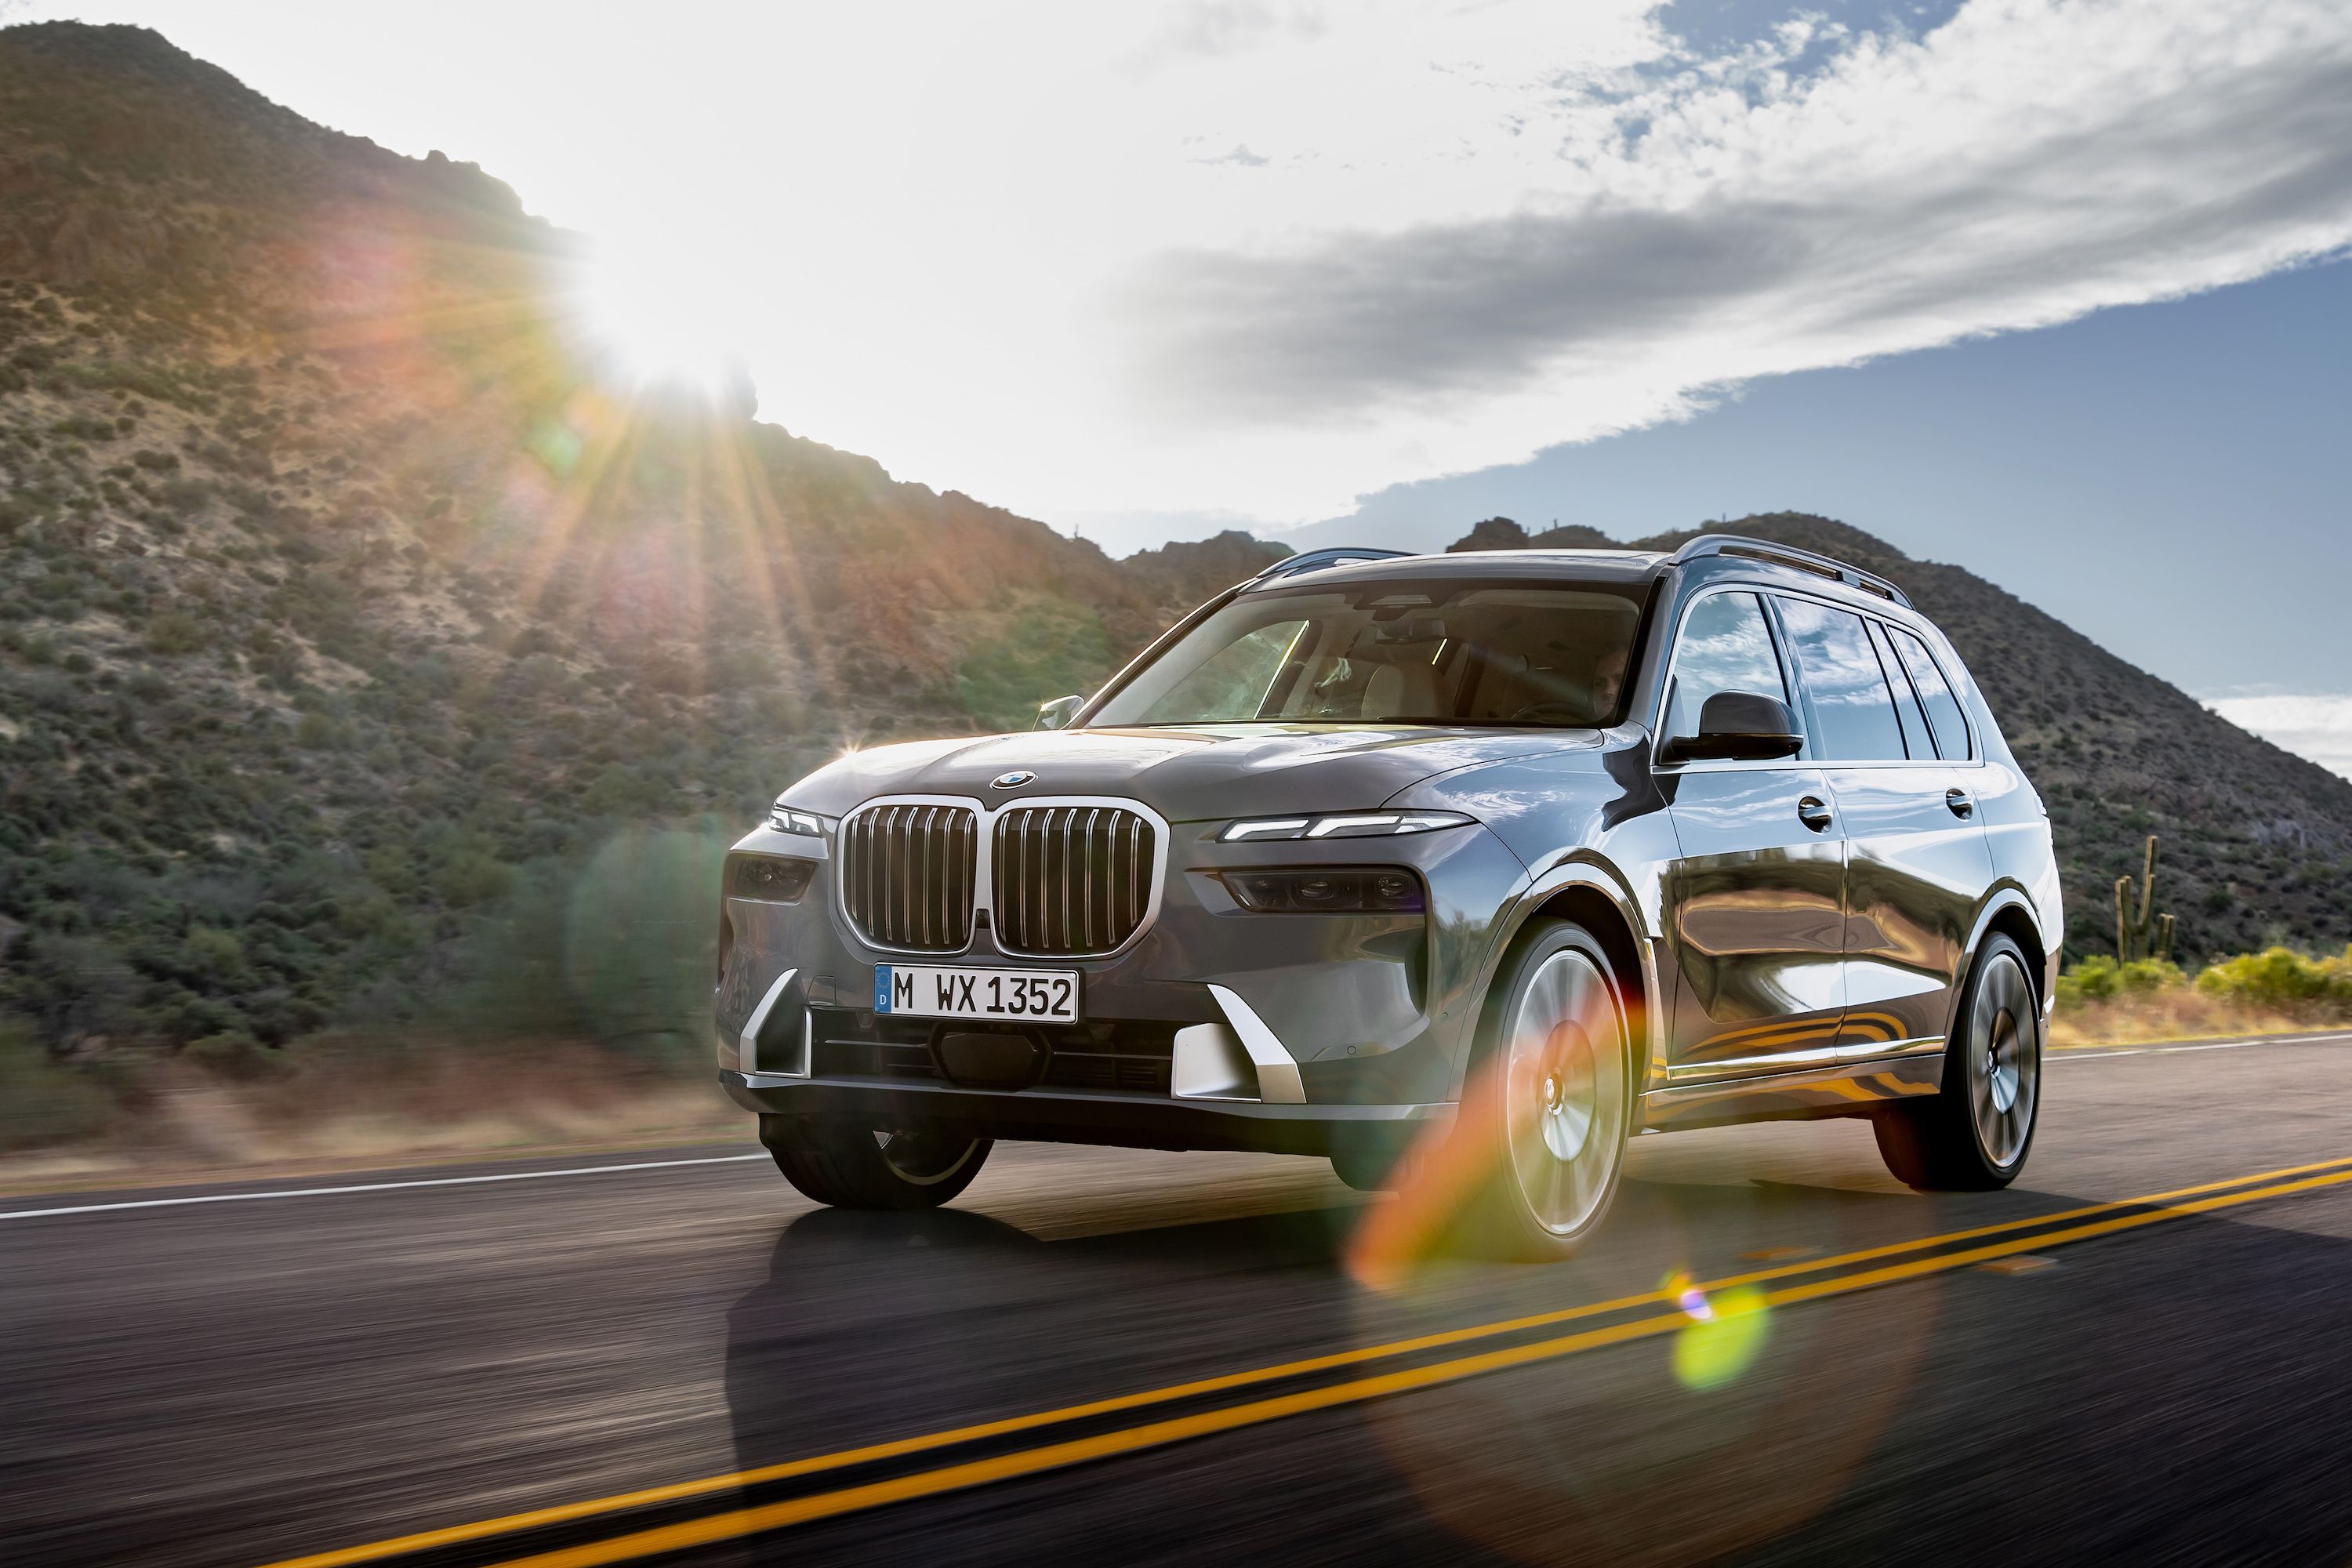 Driven: The 2023 BMW X7 Is Two Steps Forward, Half A Step Back